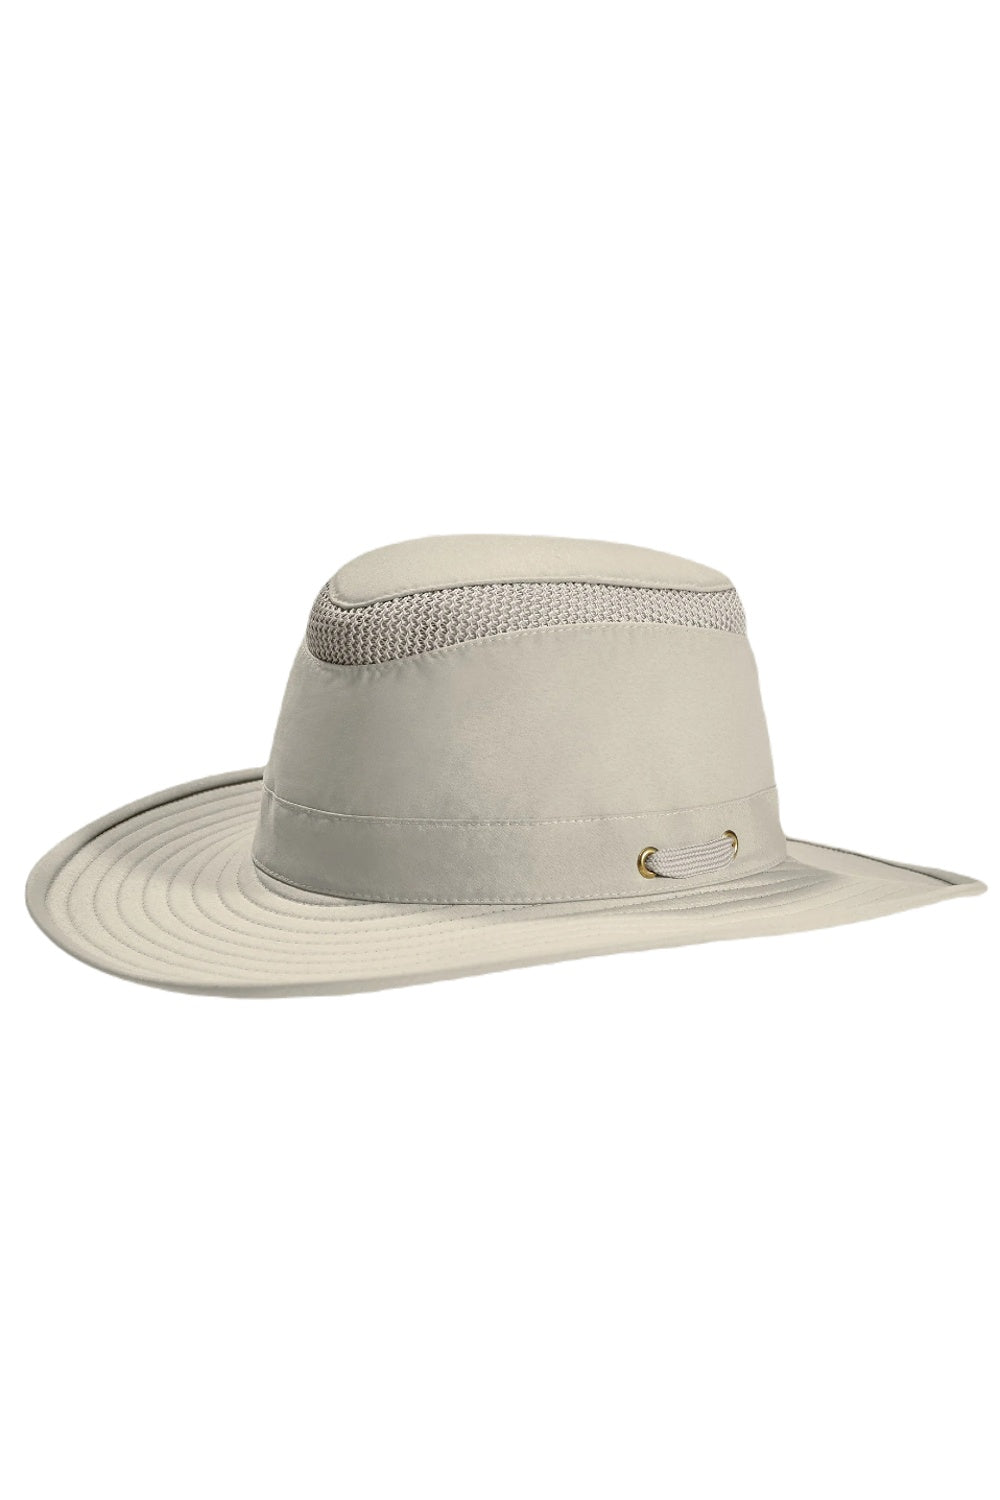 Tilley Hats Airflo Broad Brim Recycled Hat In Light Stone 